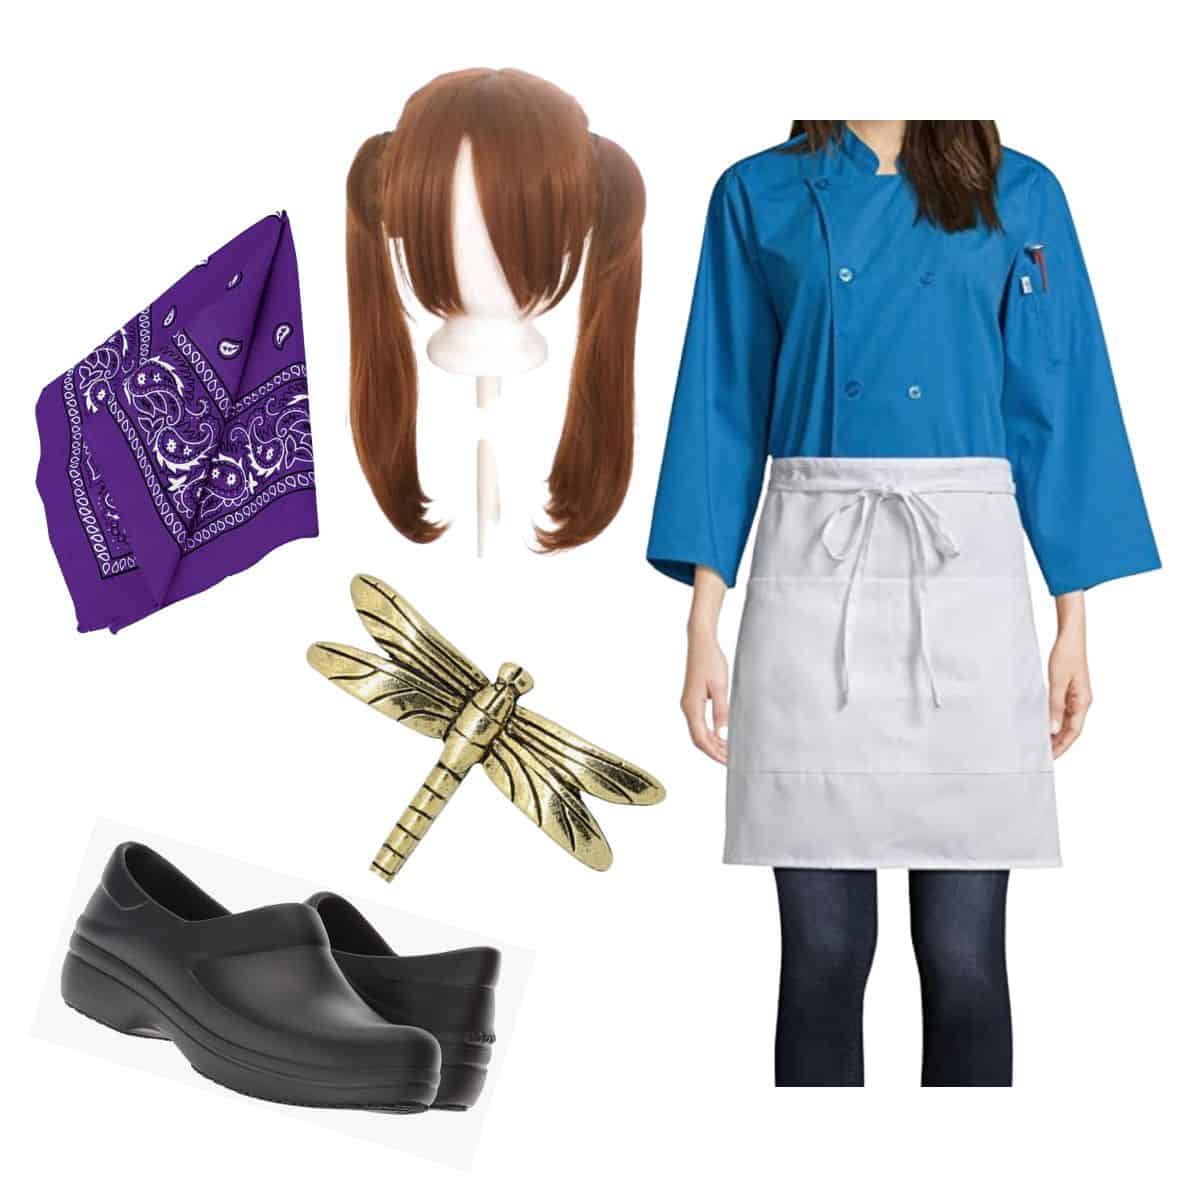 sookie st james costume from gilmore girls